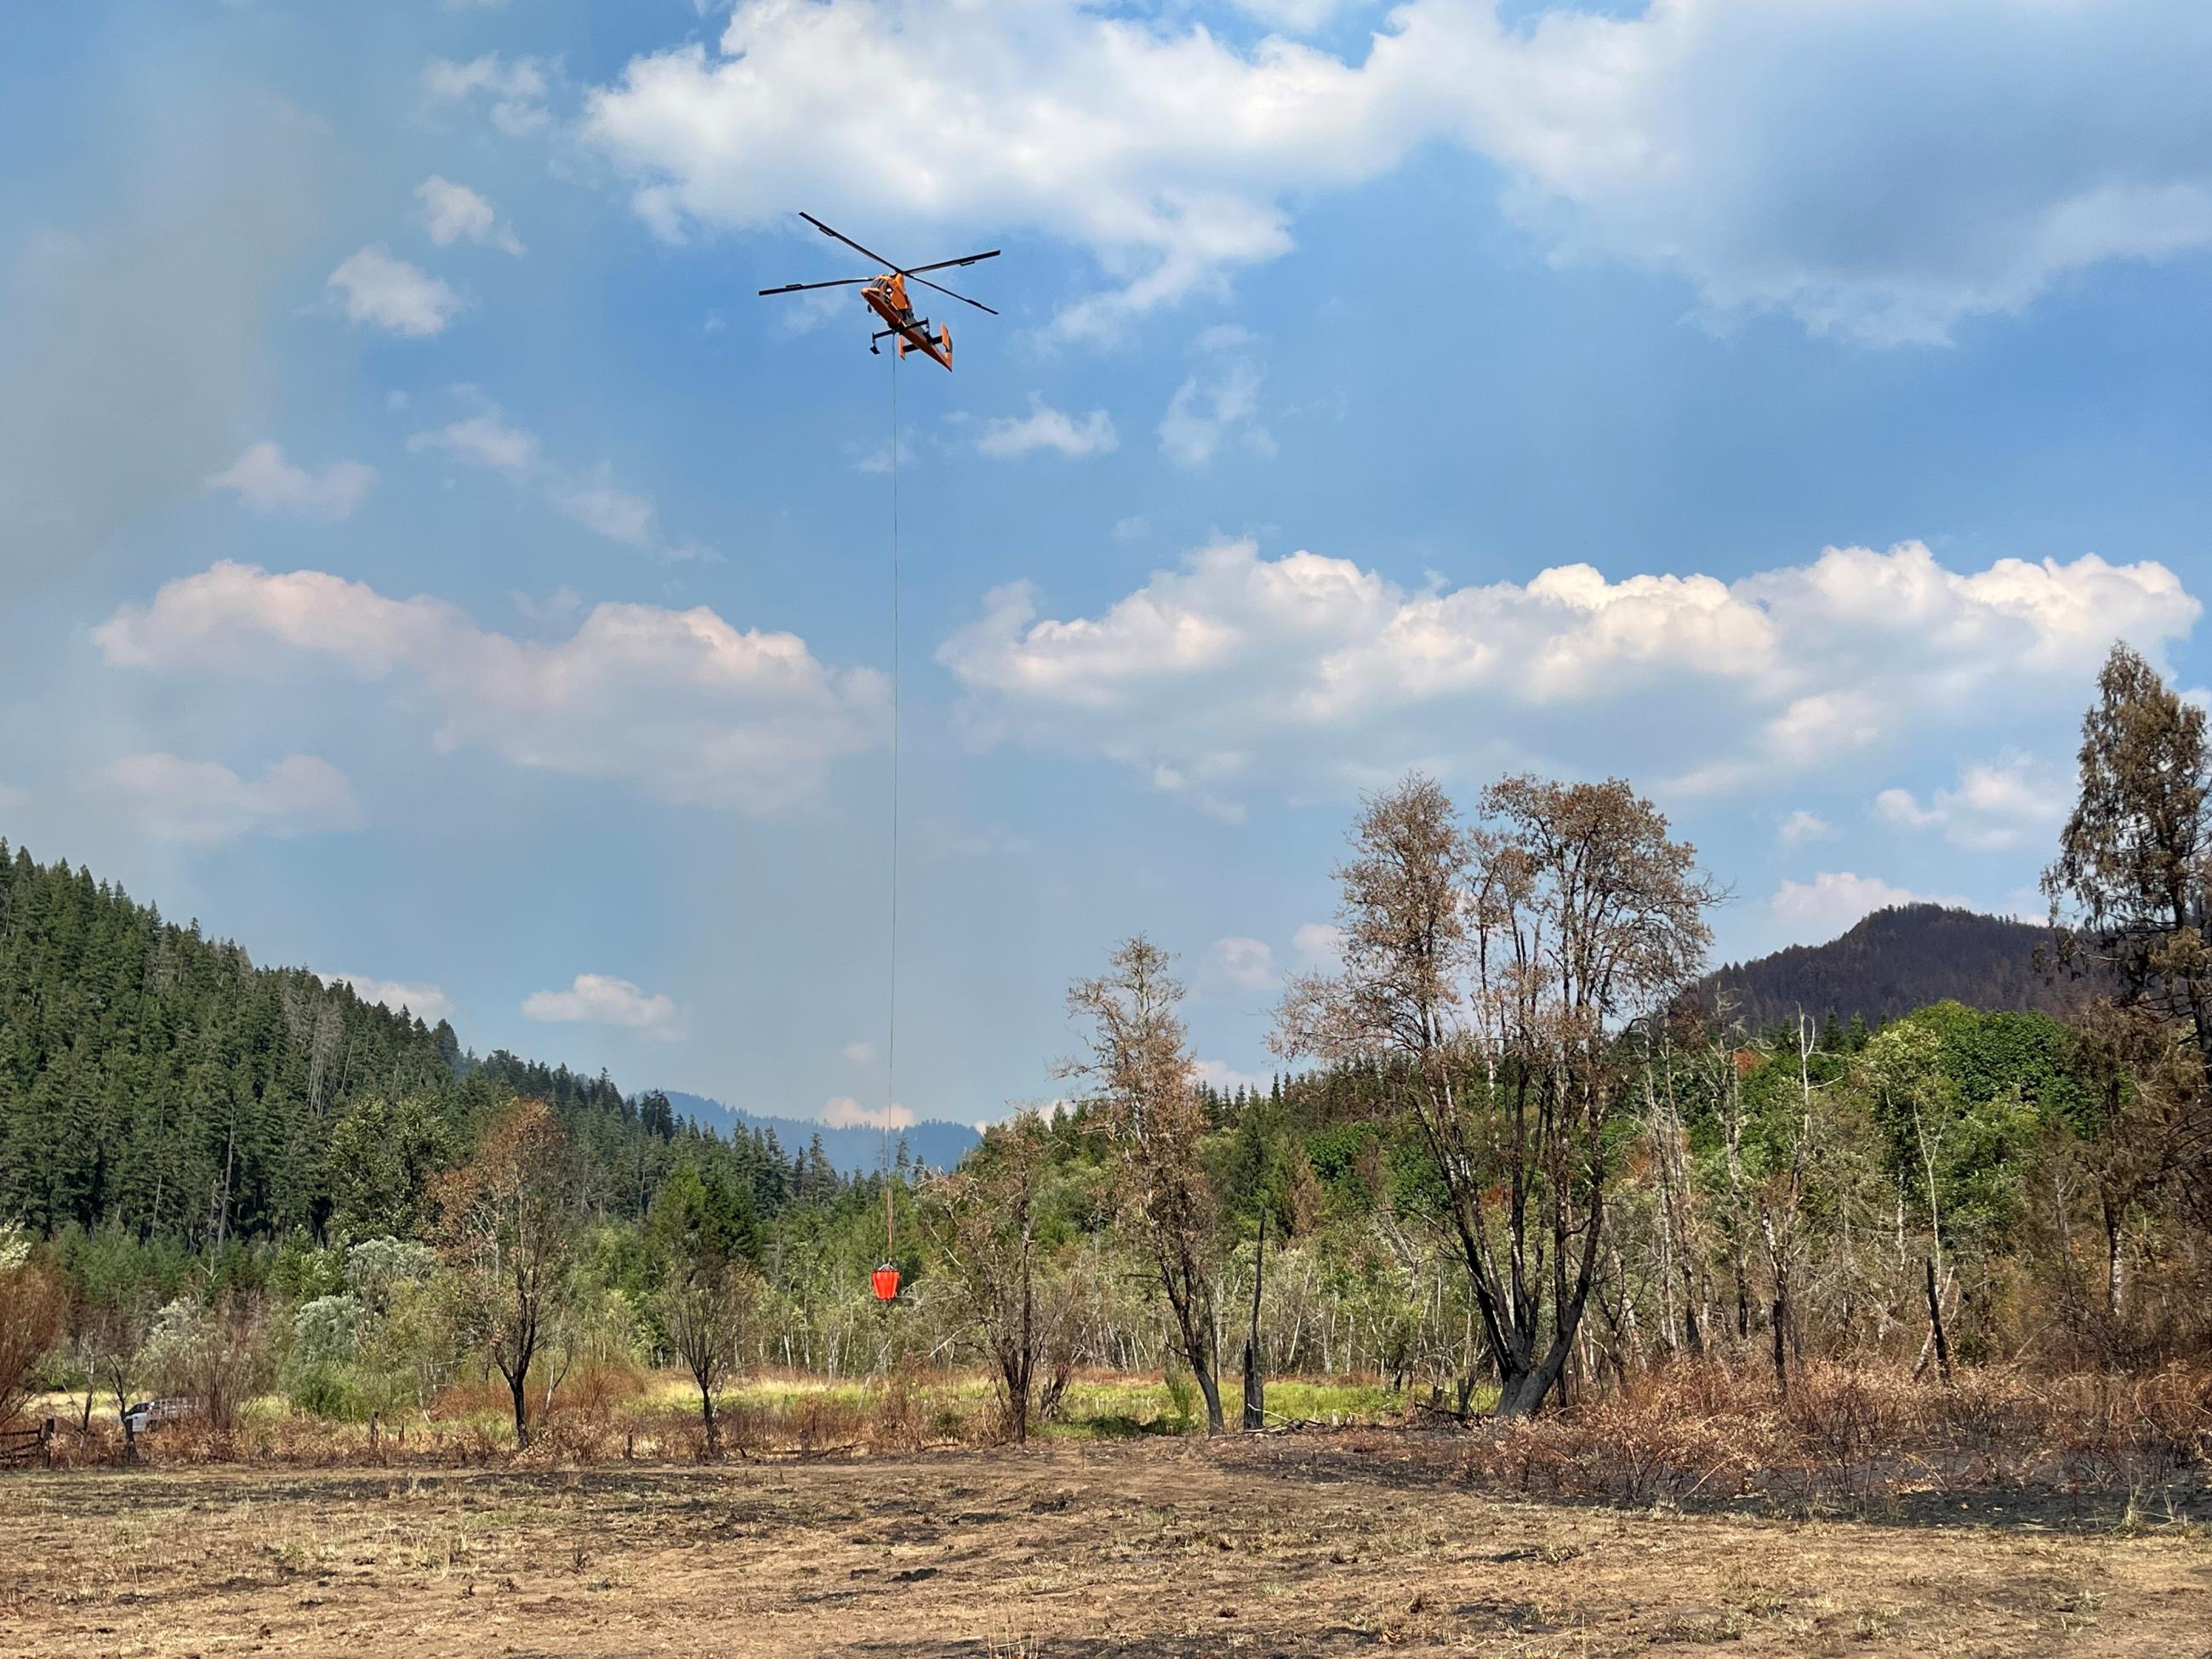 A K-max heavy helicopter at the dipsite filling its bucket to drop water on the active parts of the fire.